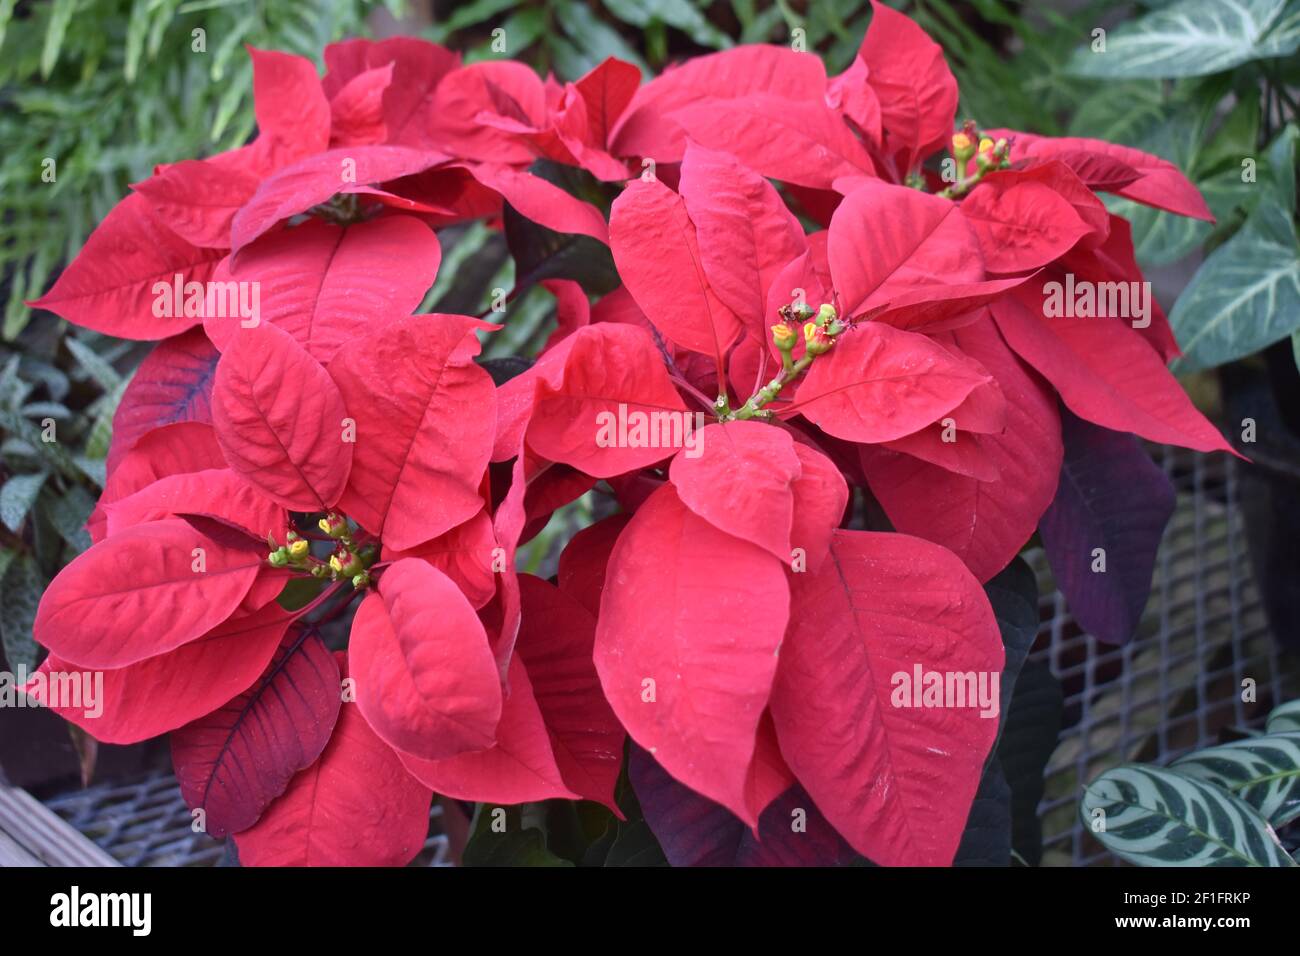 Red poinsettia leaves amid a bed of green foliage with an intentional blur -03 Stock Photo